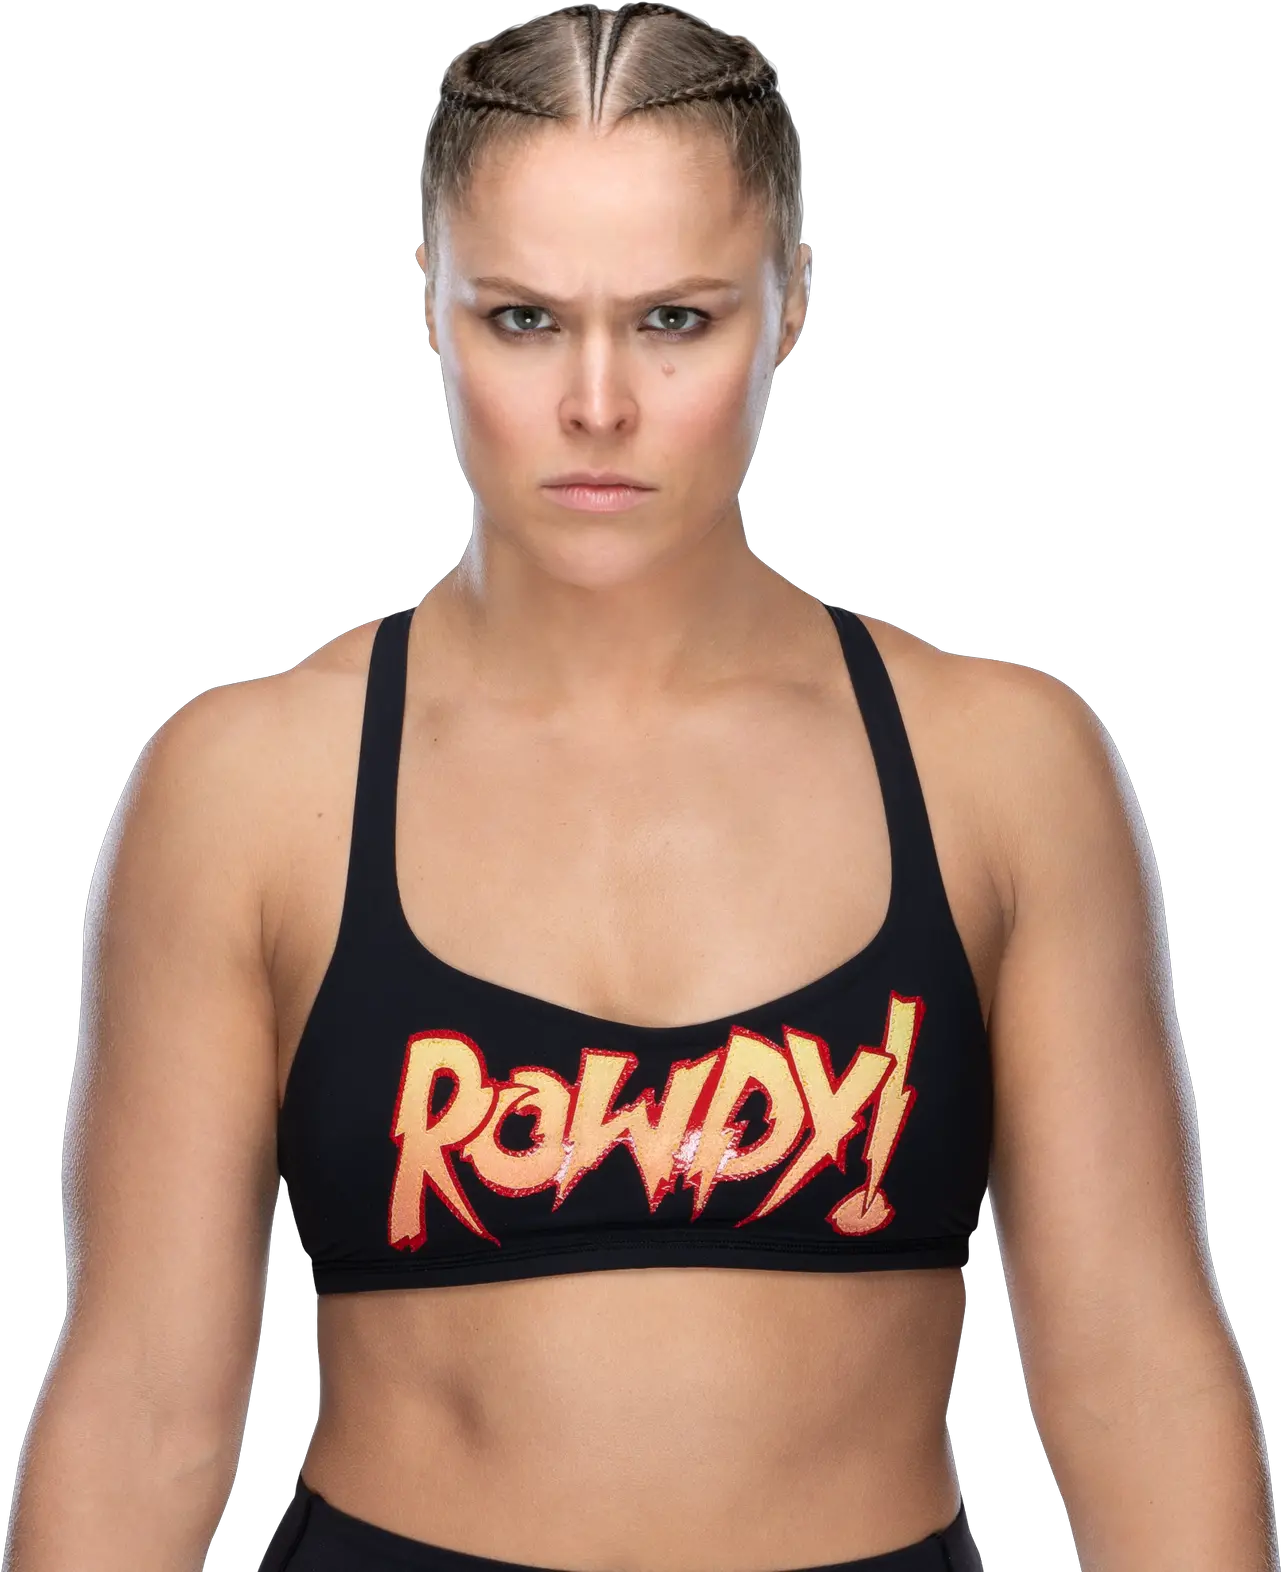 Wwe Ronda Rousey Png Image Hd Ronda Rousey Png Ronda Rousey Png